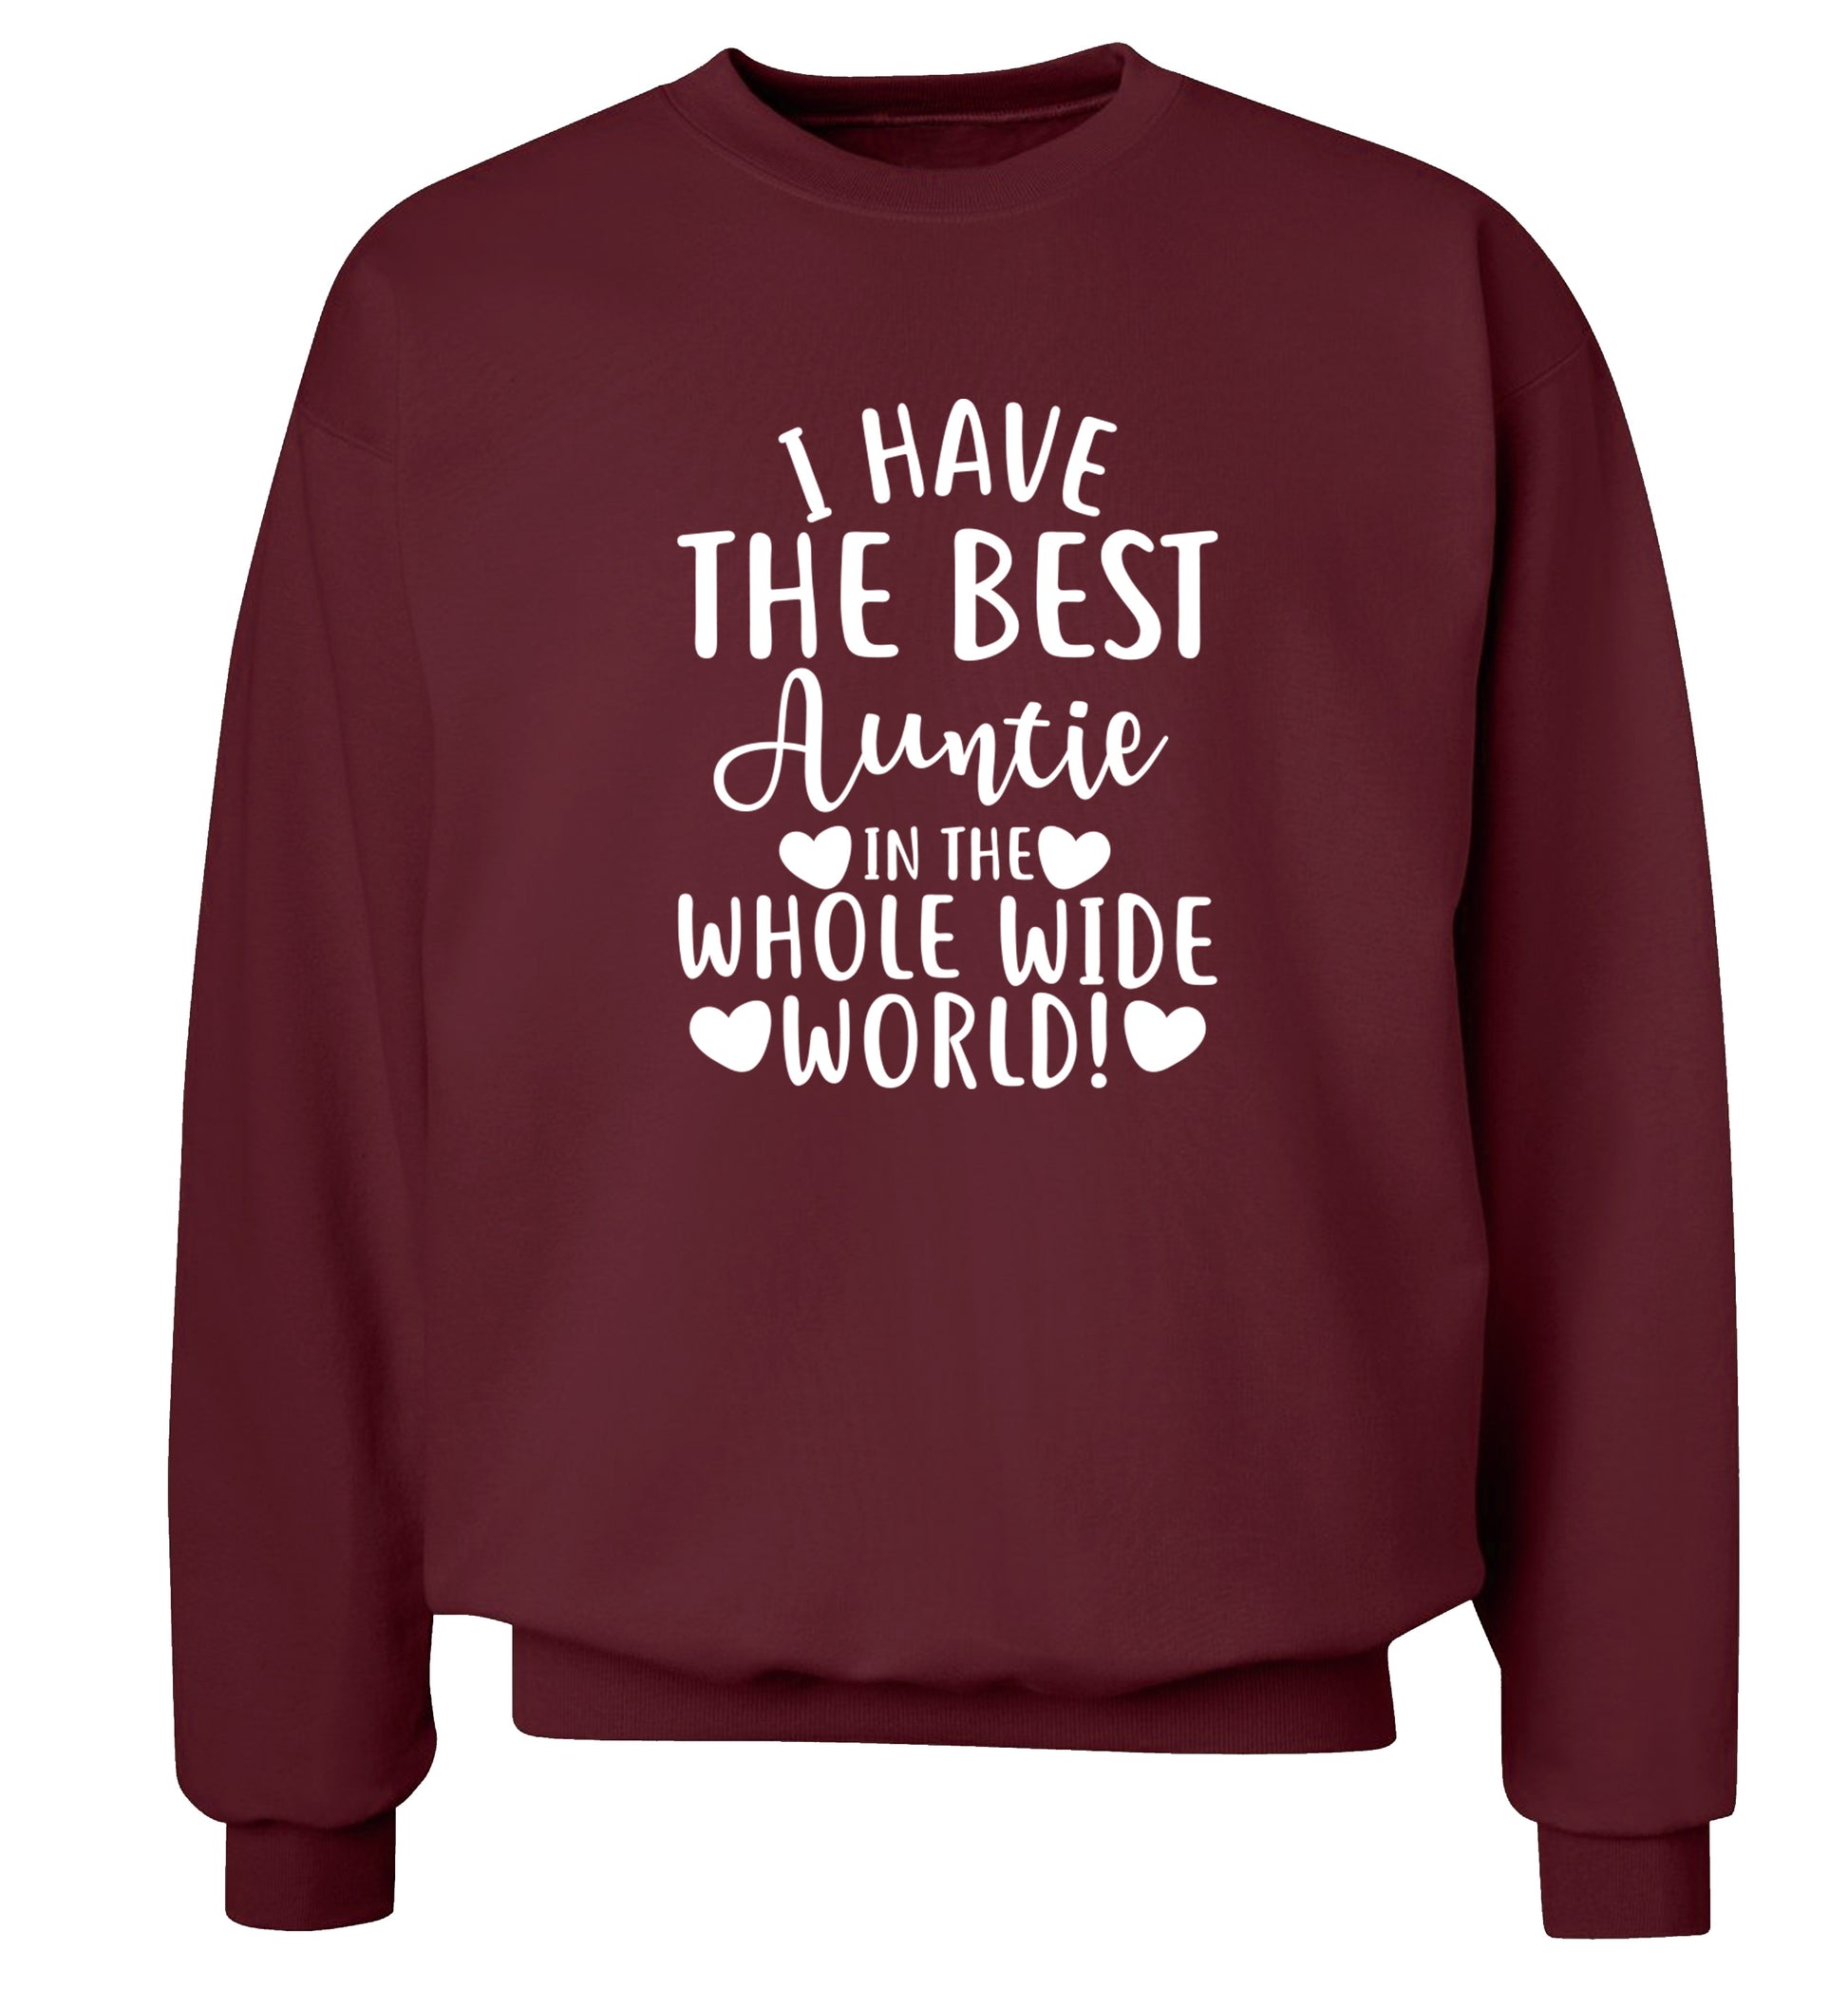 I have the best auntie in the whole wide world! Adult's unisex maroon Sweater 2XL